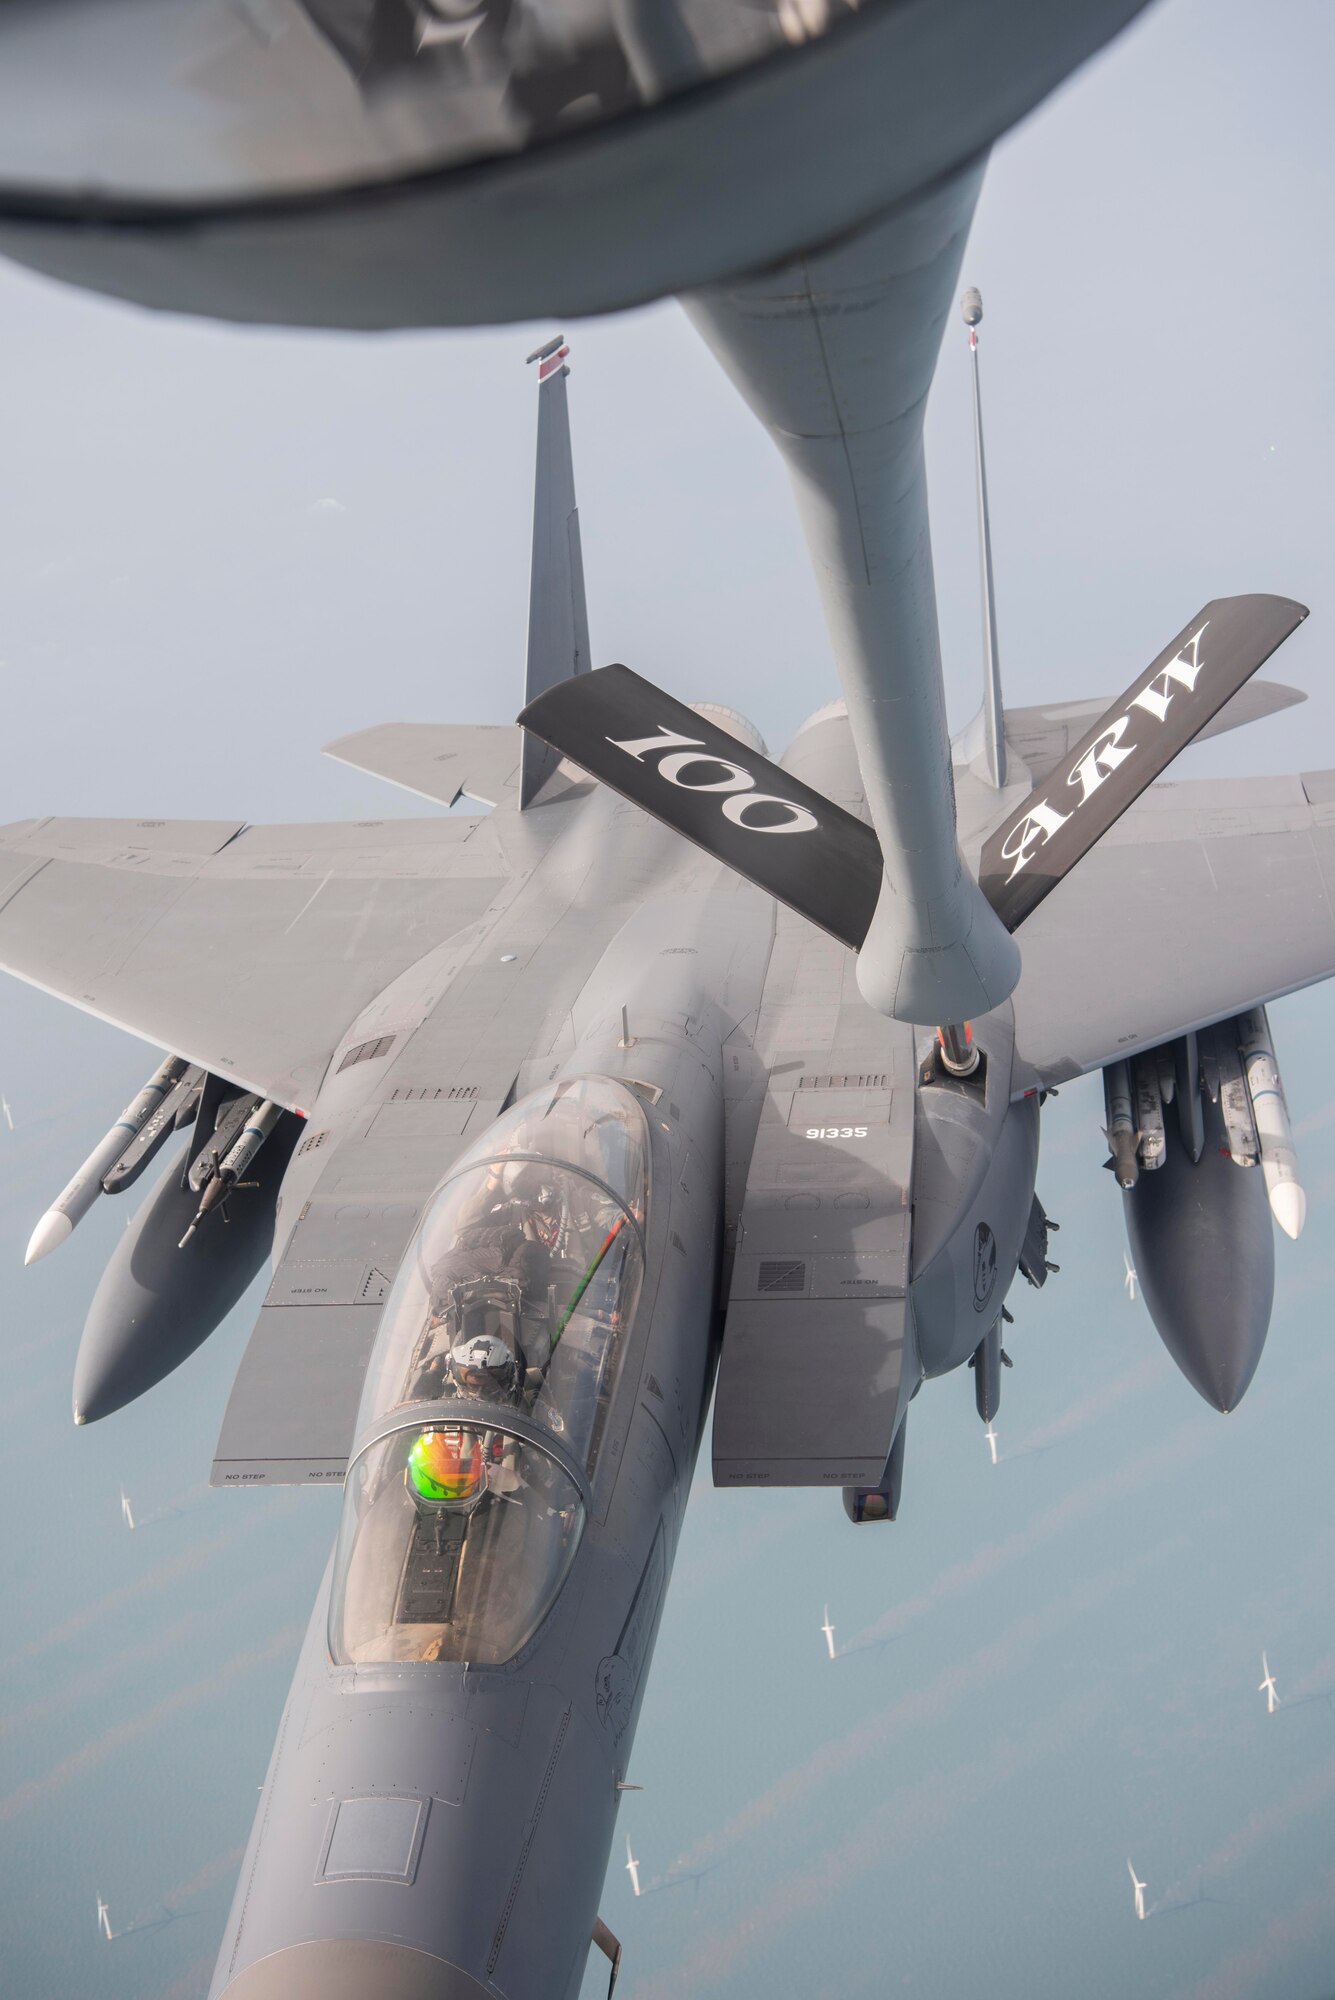 A U.S. Air Force KC-135 Stratotanker aircraft assigned to the 100th Air Refueling Wing, Royal Air Force Mildenhall, England, refuels a U.S. Air Force F-15E Strike Eagle aircraft assigned to the 493rd Fighter Squadron, RAF Lakenheath, England, during Exercise Wolff Pack over the coast of the United Kingdom, Sept. 30, 2020. The exercise tested the 100th ARW’s ability to utilize agile combat employment concepts to support U.S. allied and partner people and assets. (U.S. Air Force photo by Airman 1st Class Joseph Barron)